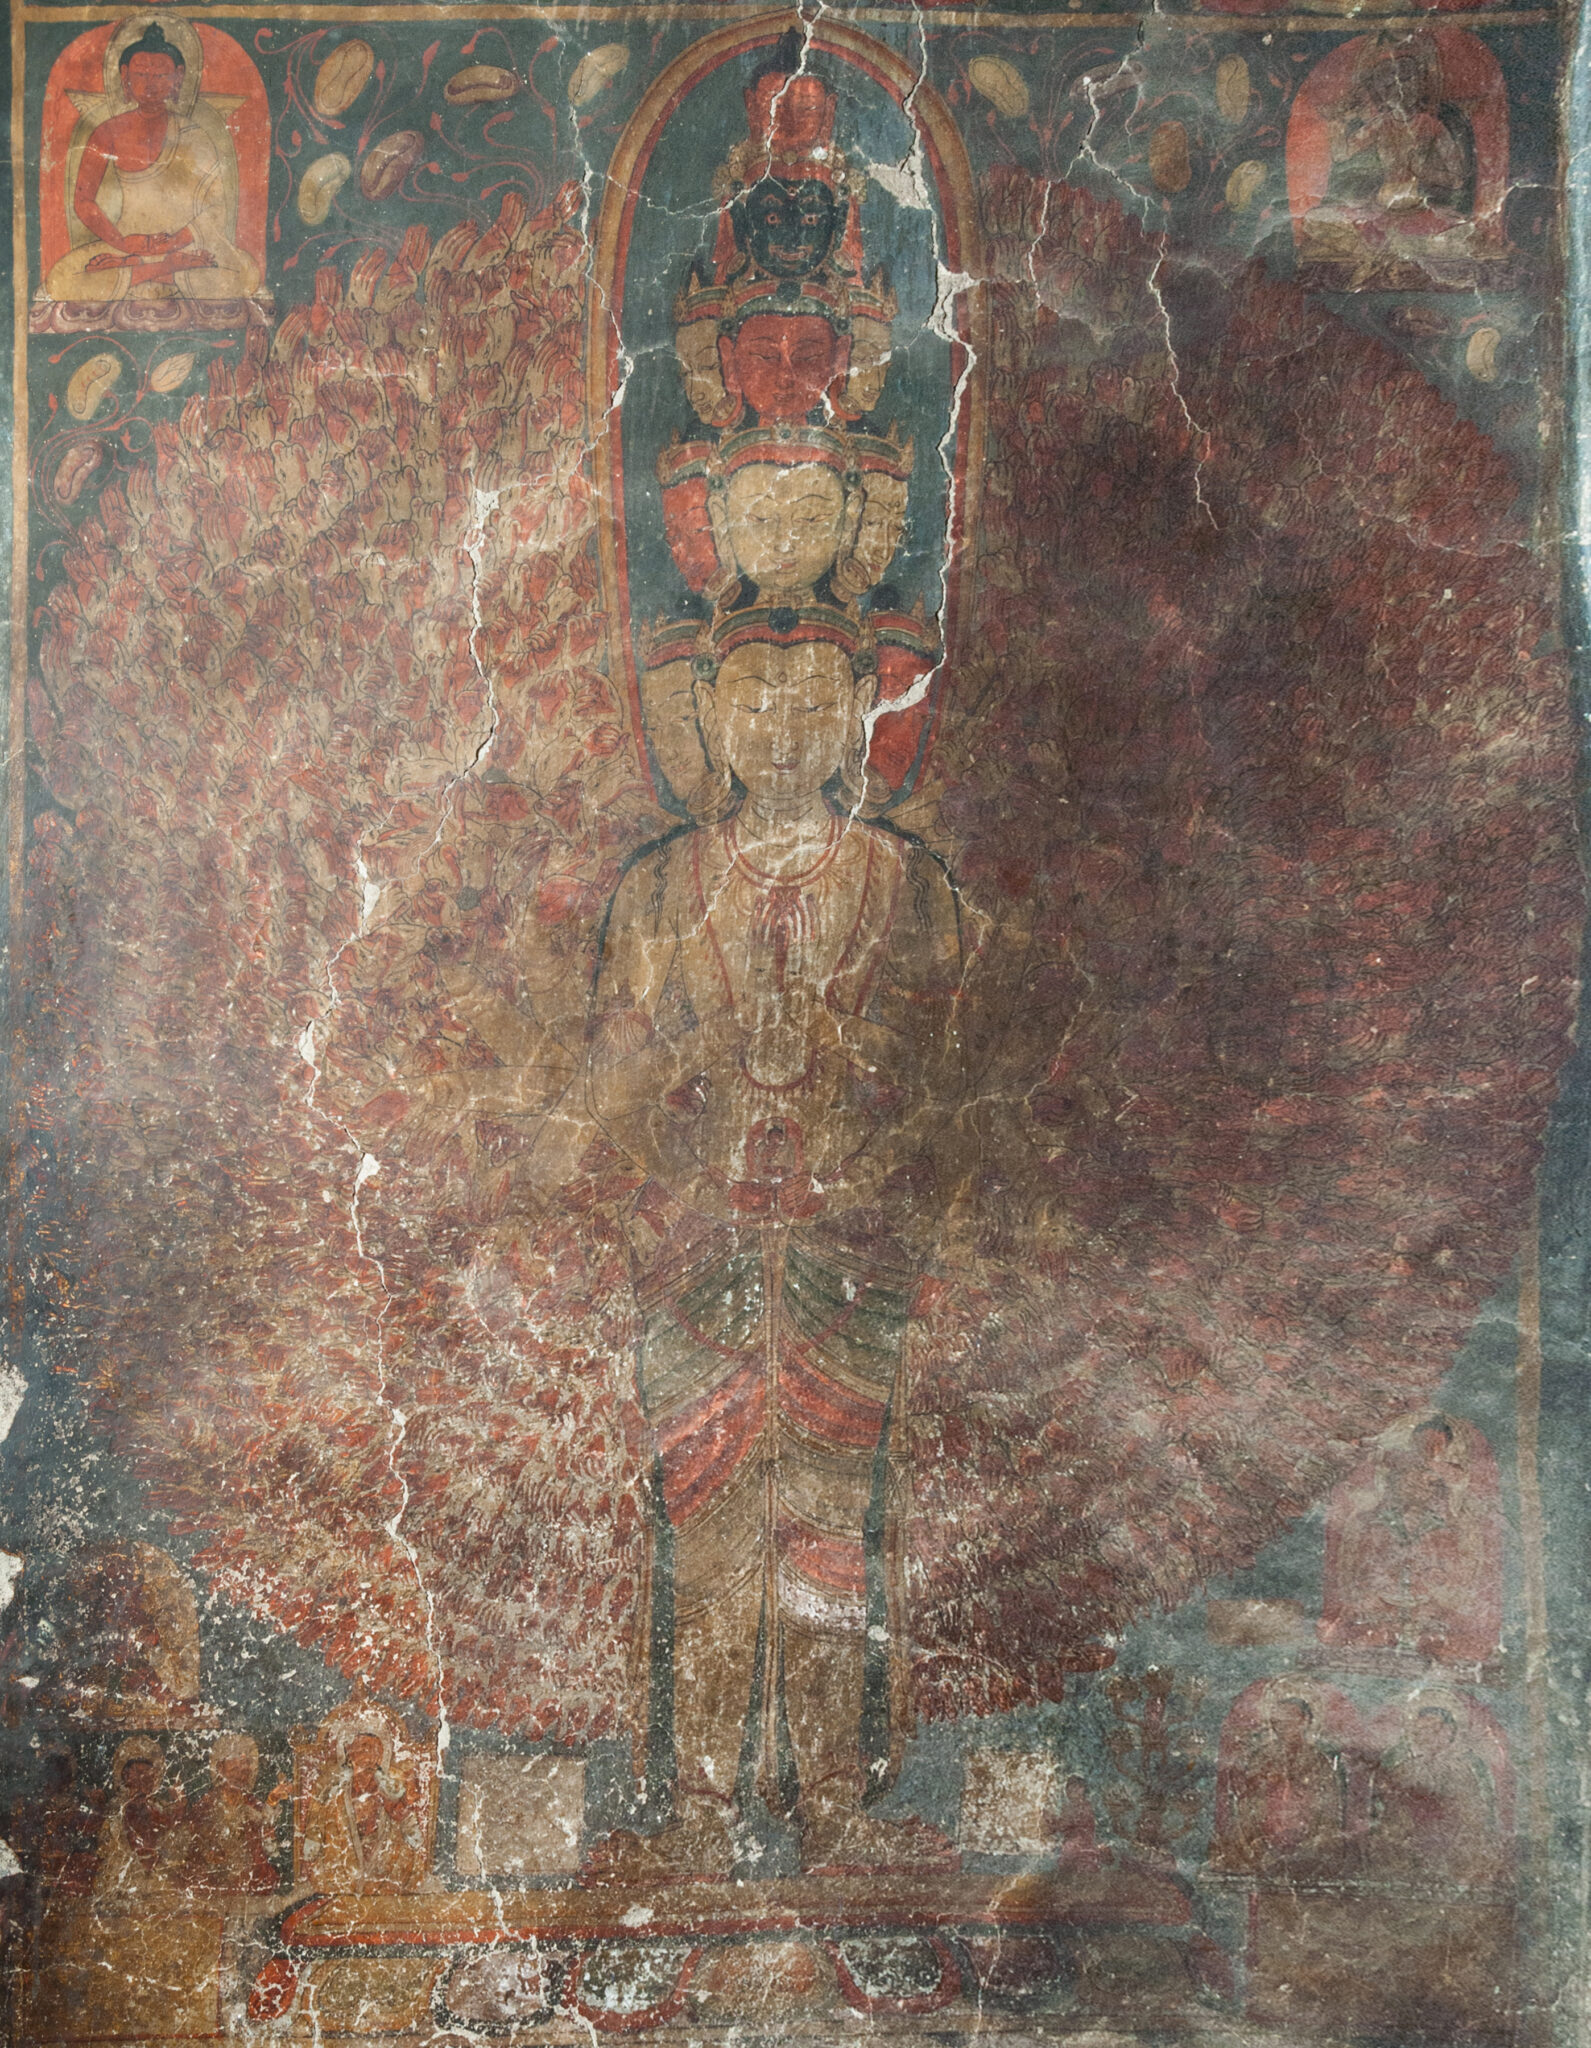 Mural depicting Bodhisattva with eleven heads arranged in five tiers; arms so numerous they resemble wings